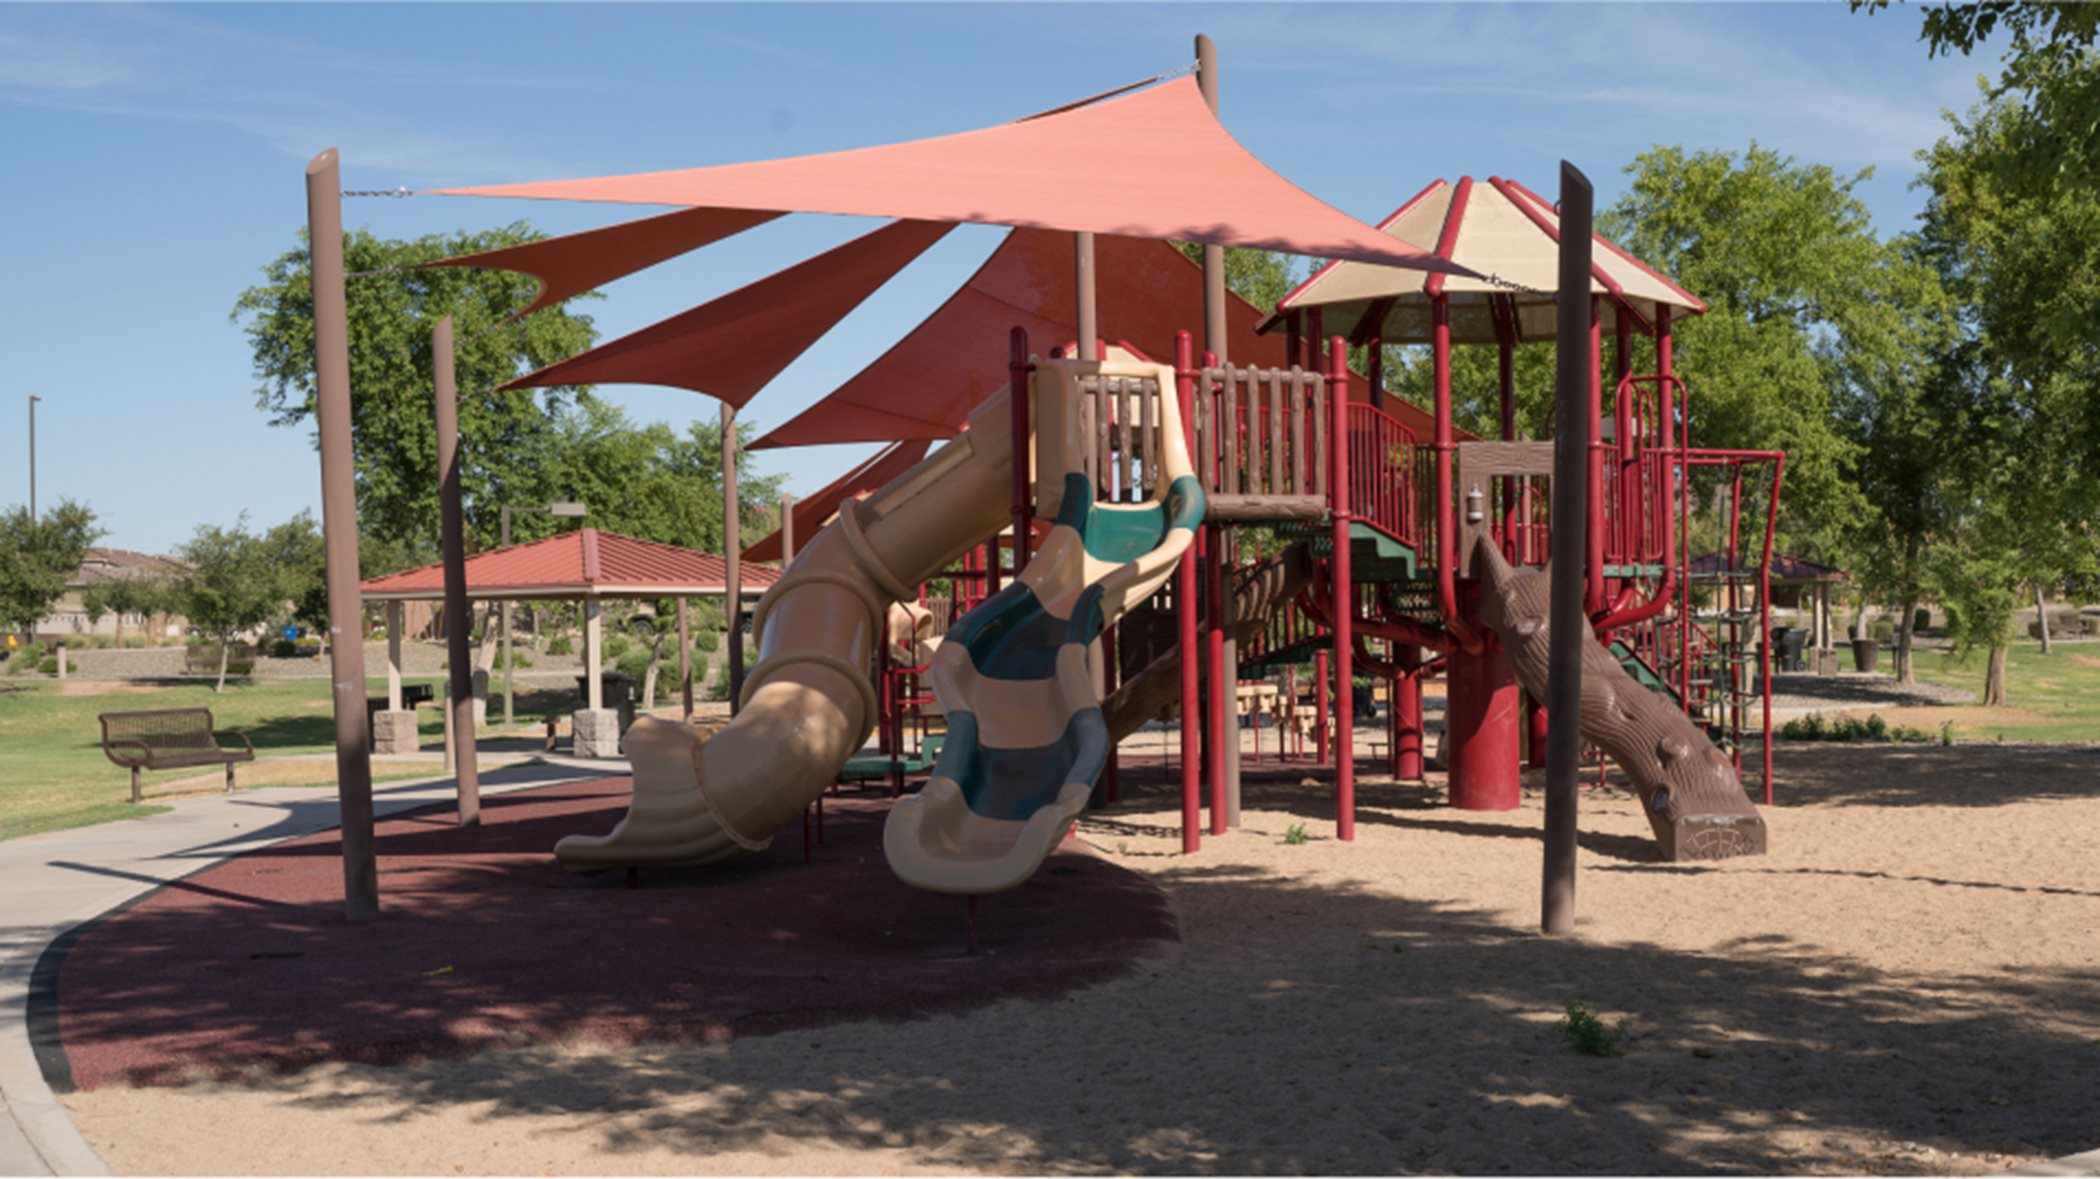 Asante community playground, equipped with slides, swings